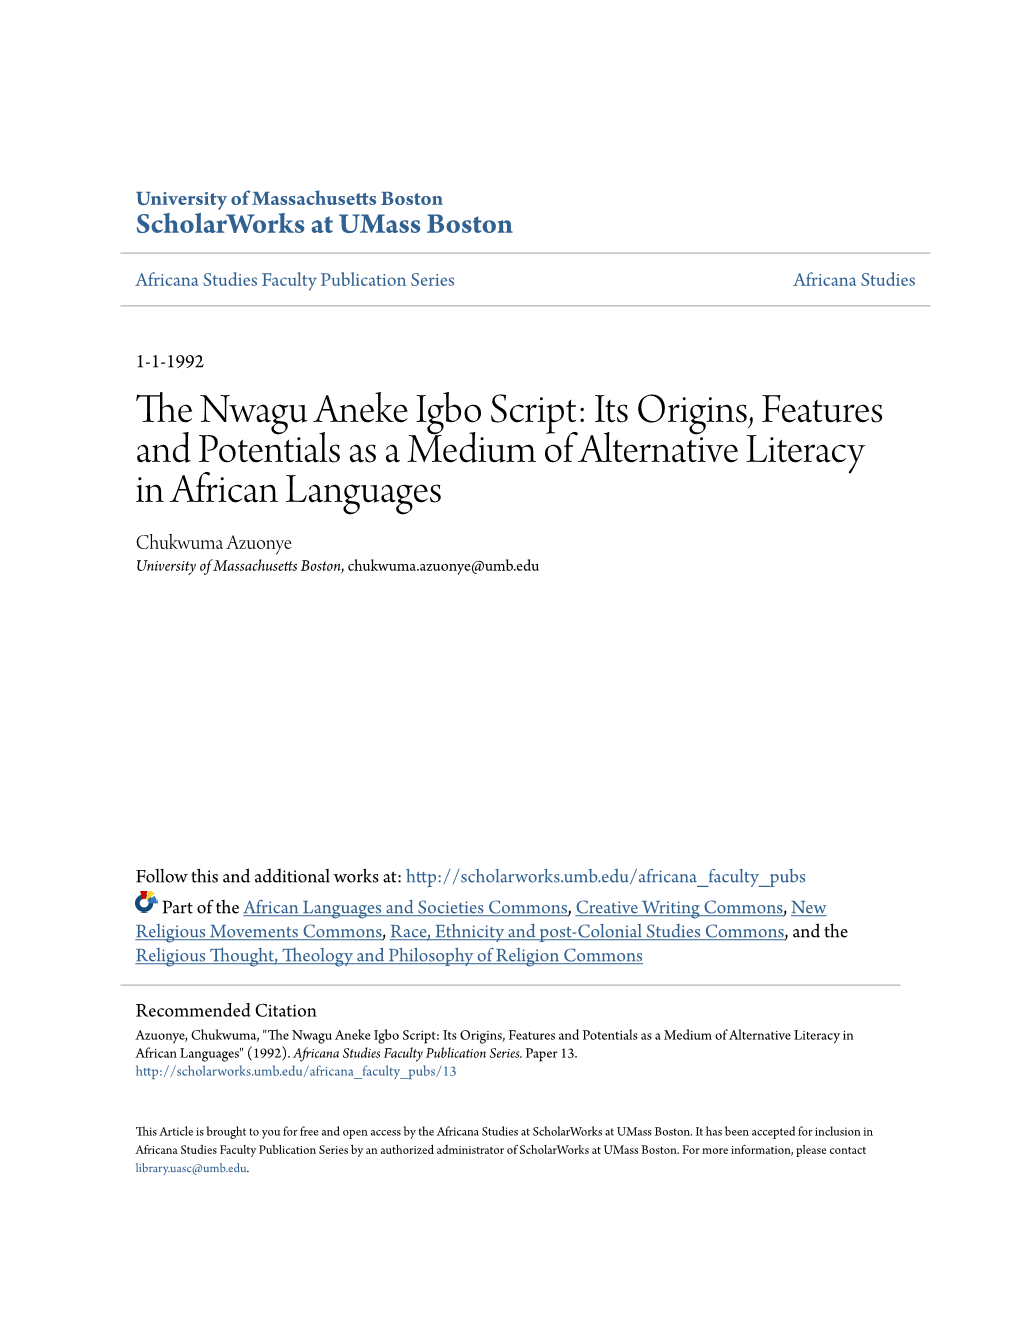 The Nwagu Aneke Igbo Script: Its Origins, Features and Potentials As a Medium of Alternative Literacy in African Languages1